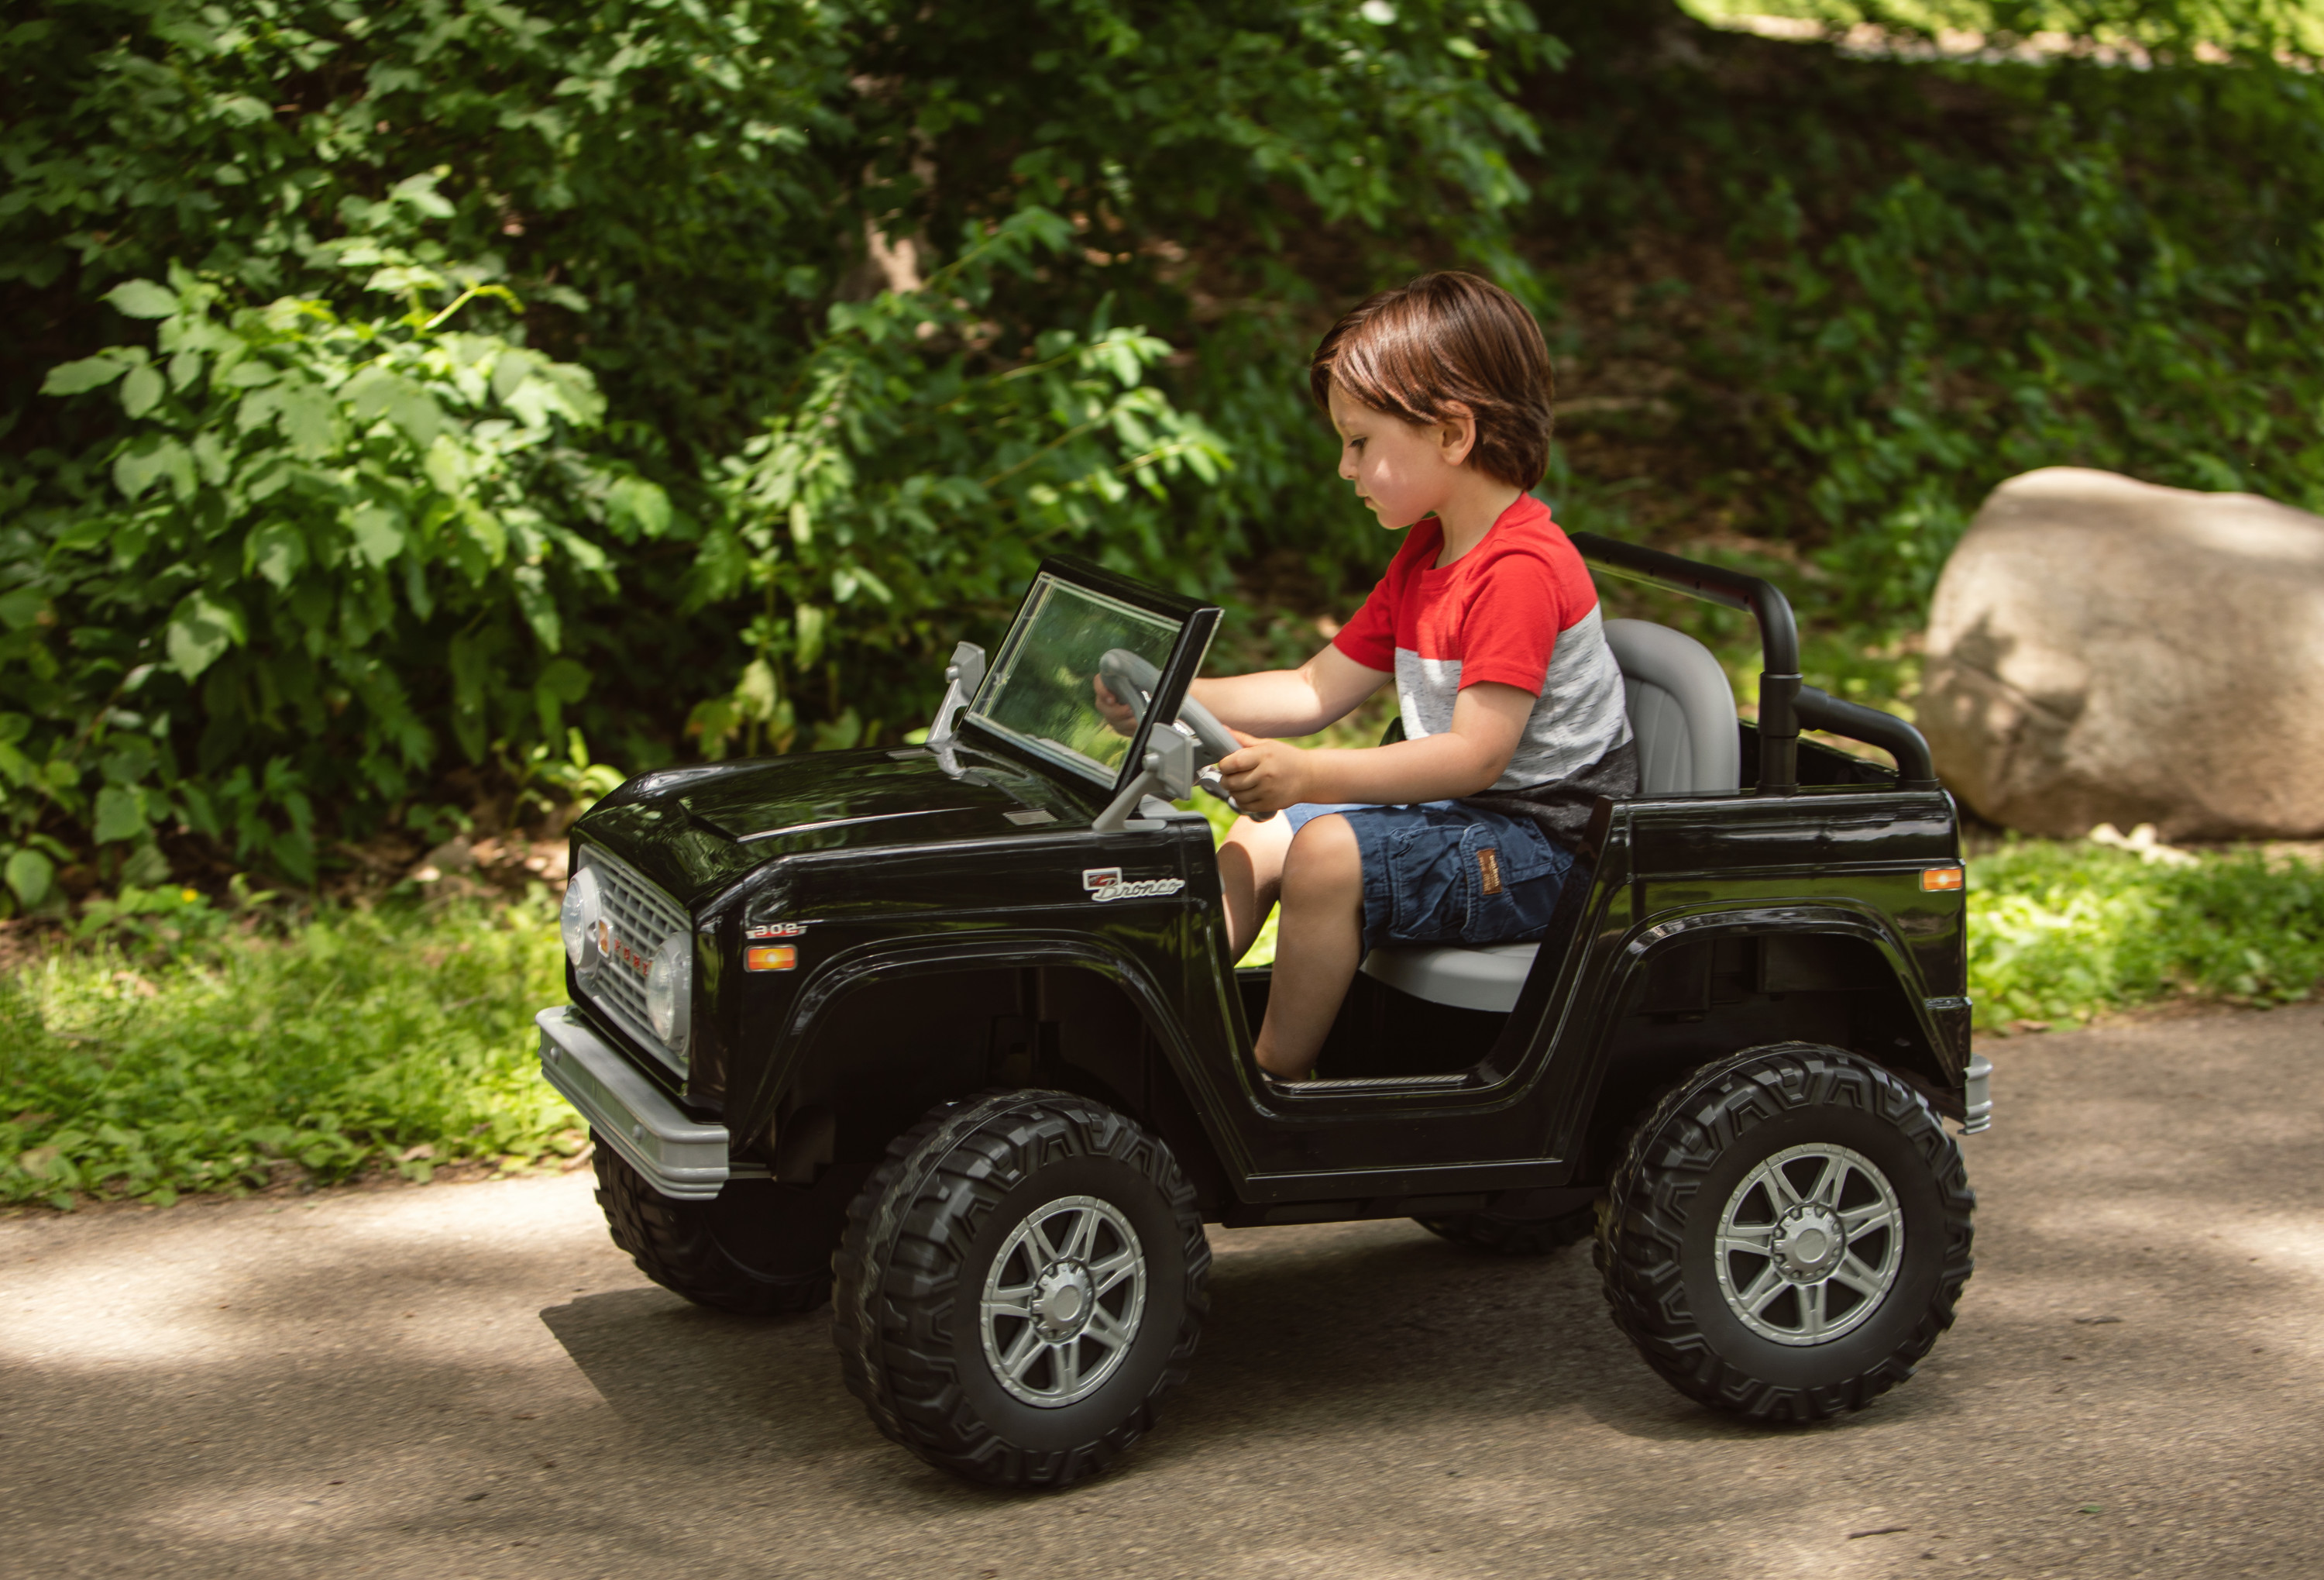 Kid Trax Classic Ford Bronco Ride-On Toy, 6-Volt, Black - image 3 of 5